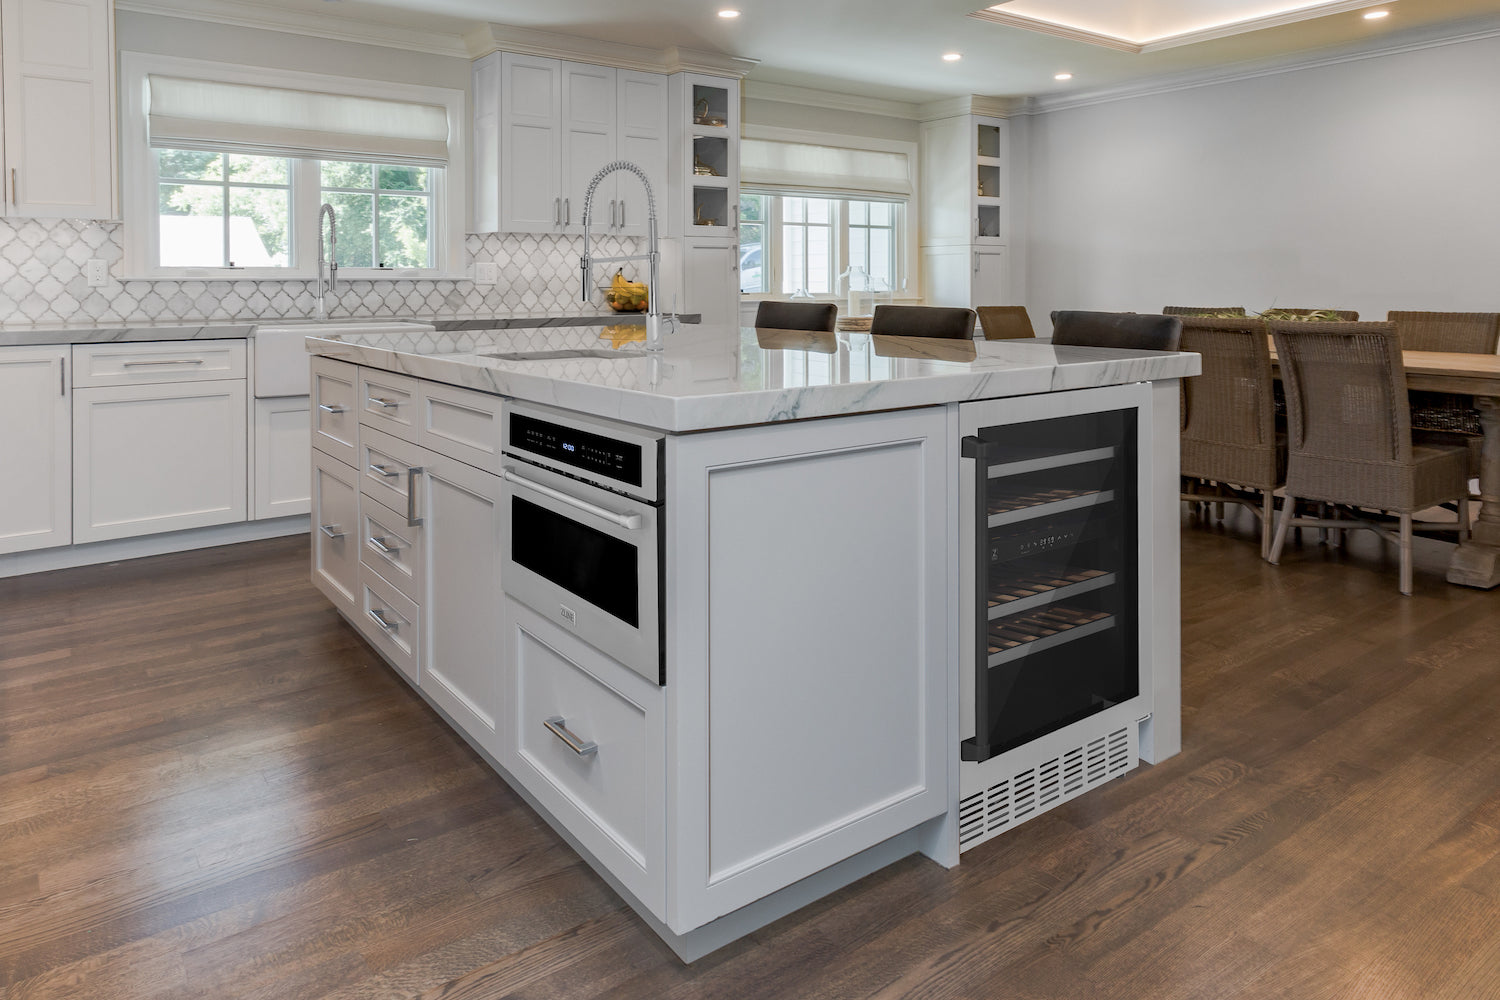 ZLINE 24" Autograph Edition Monument Wine Cooler with Matte Black accents in a farmhouse-style kitchen with island.